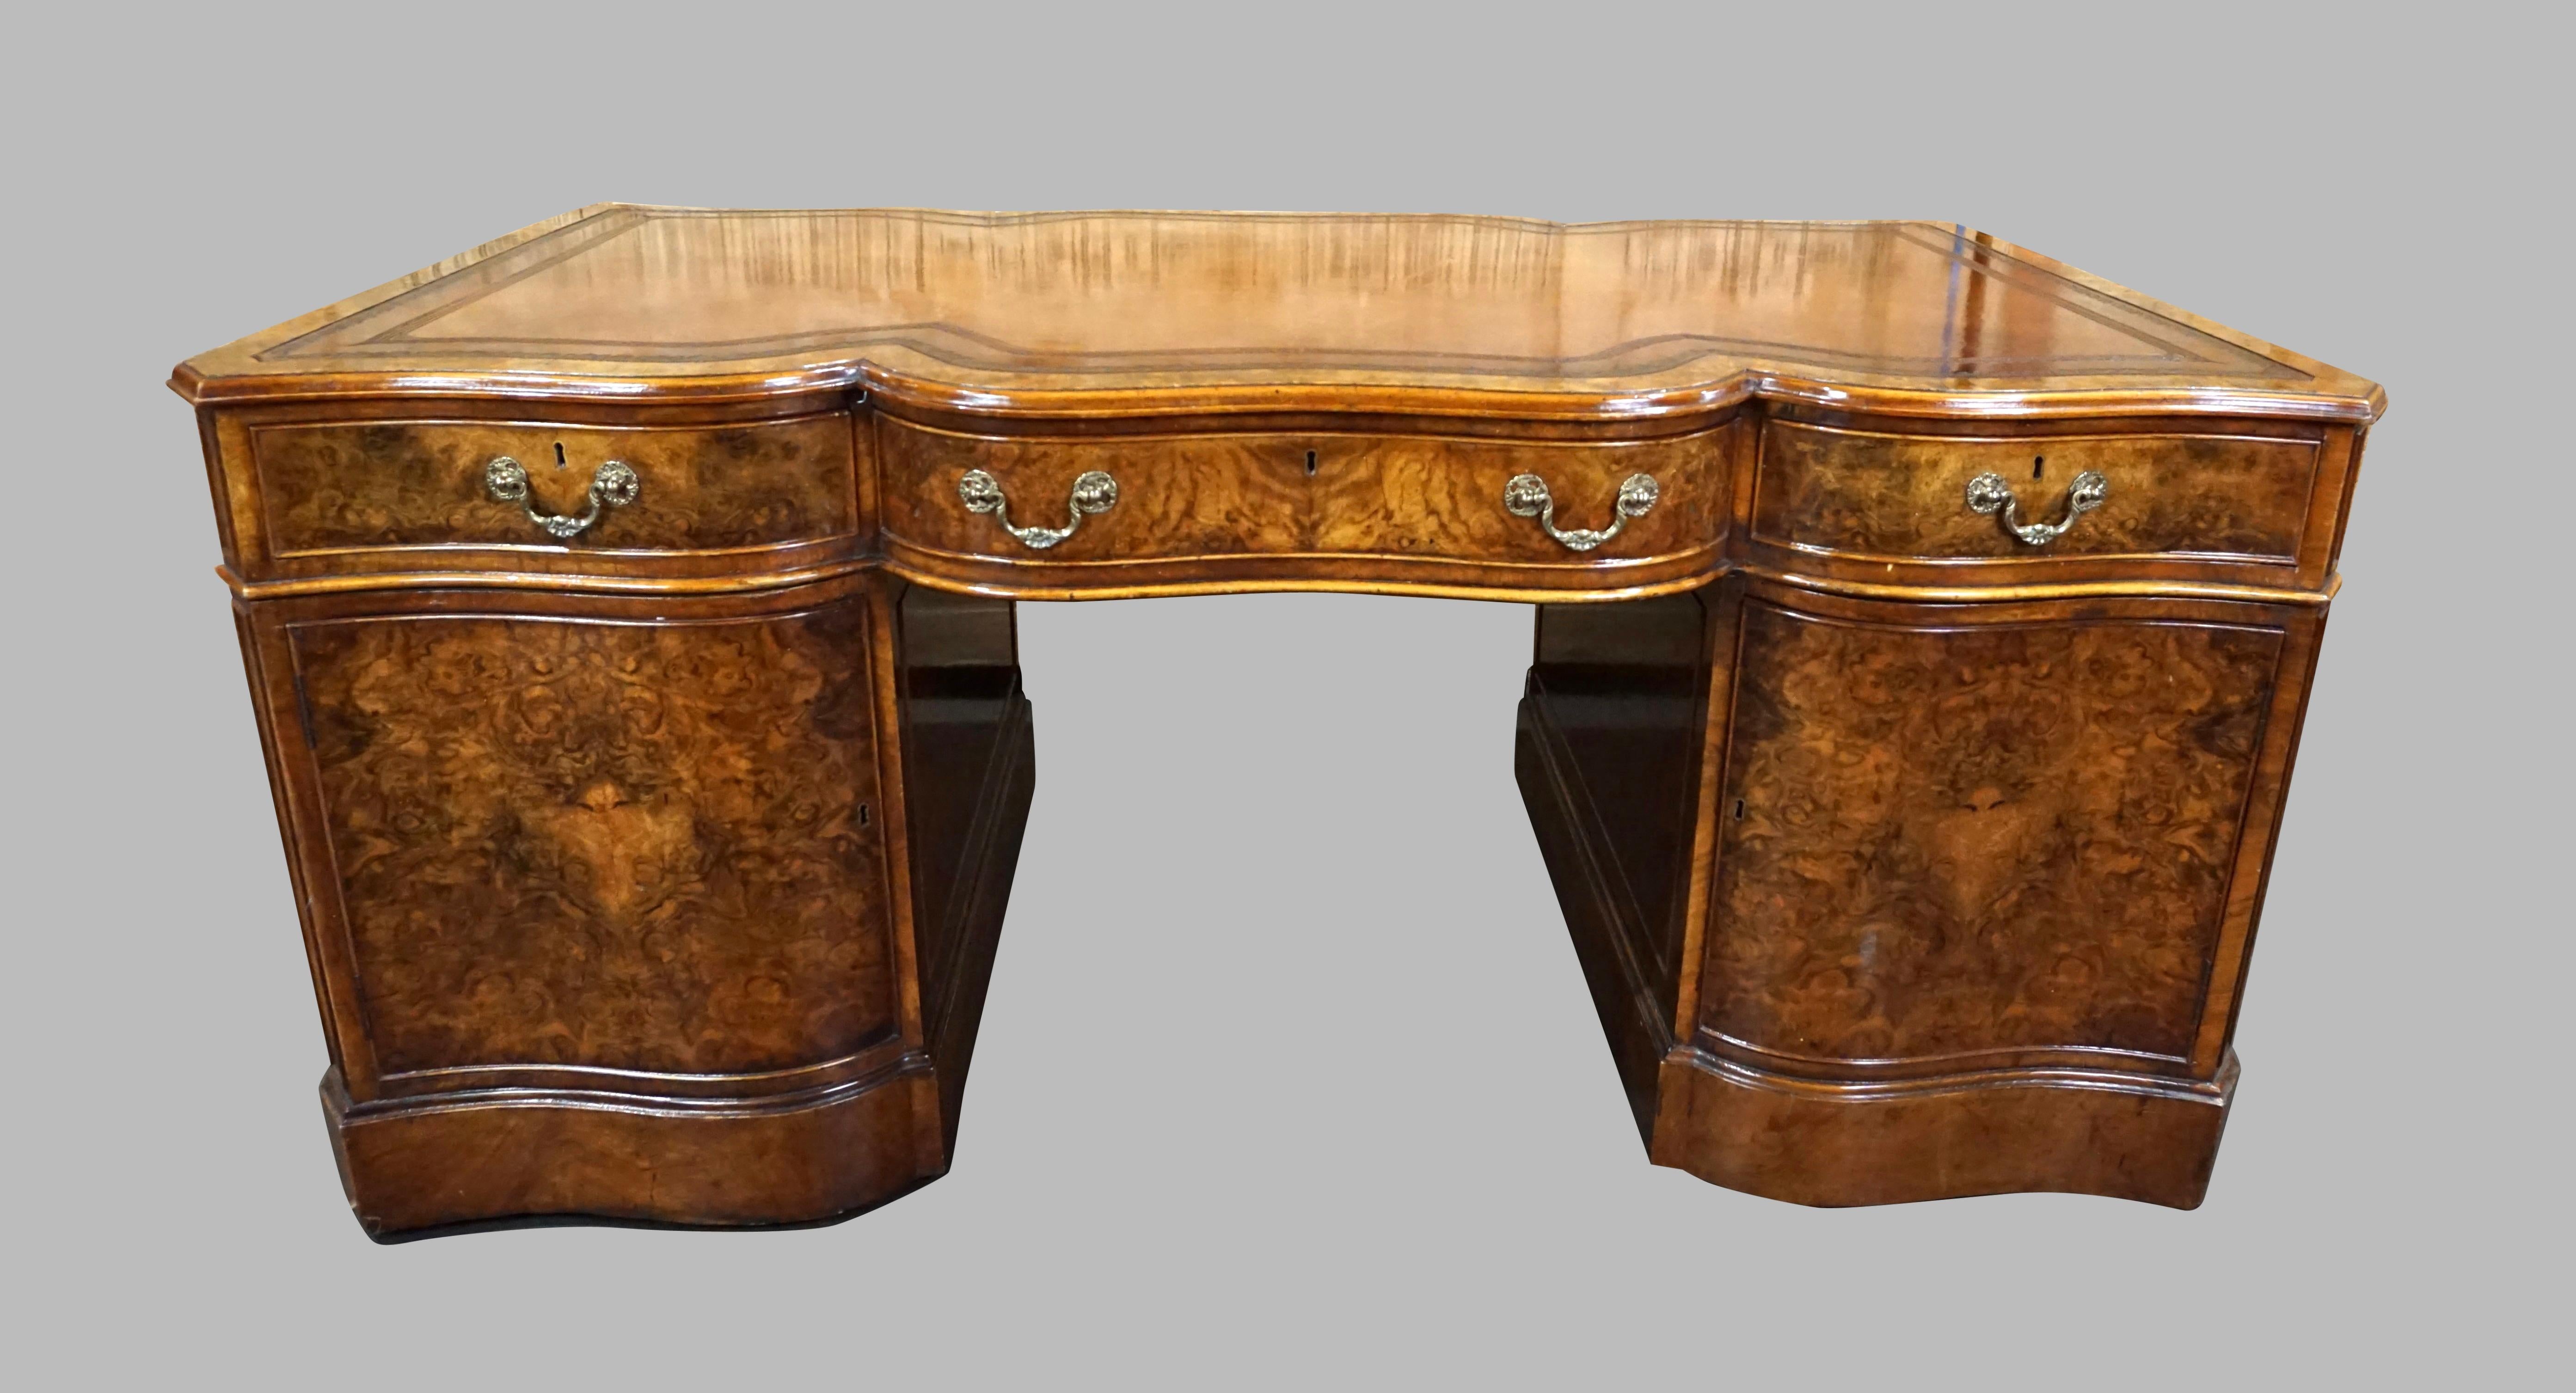 20th Century English Georgian Style Burl Walnut Partners Desk with Tooled Brown Leather Top